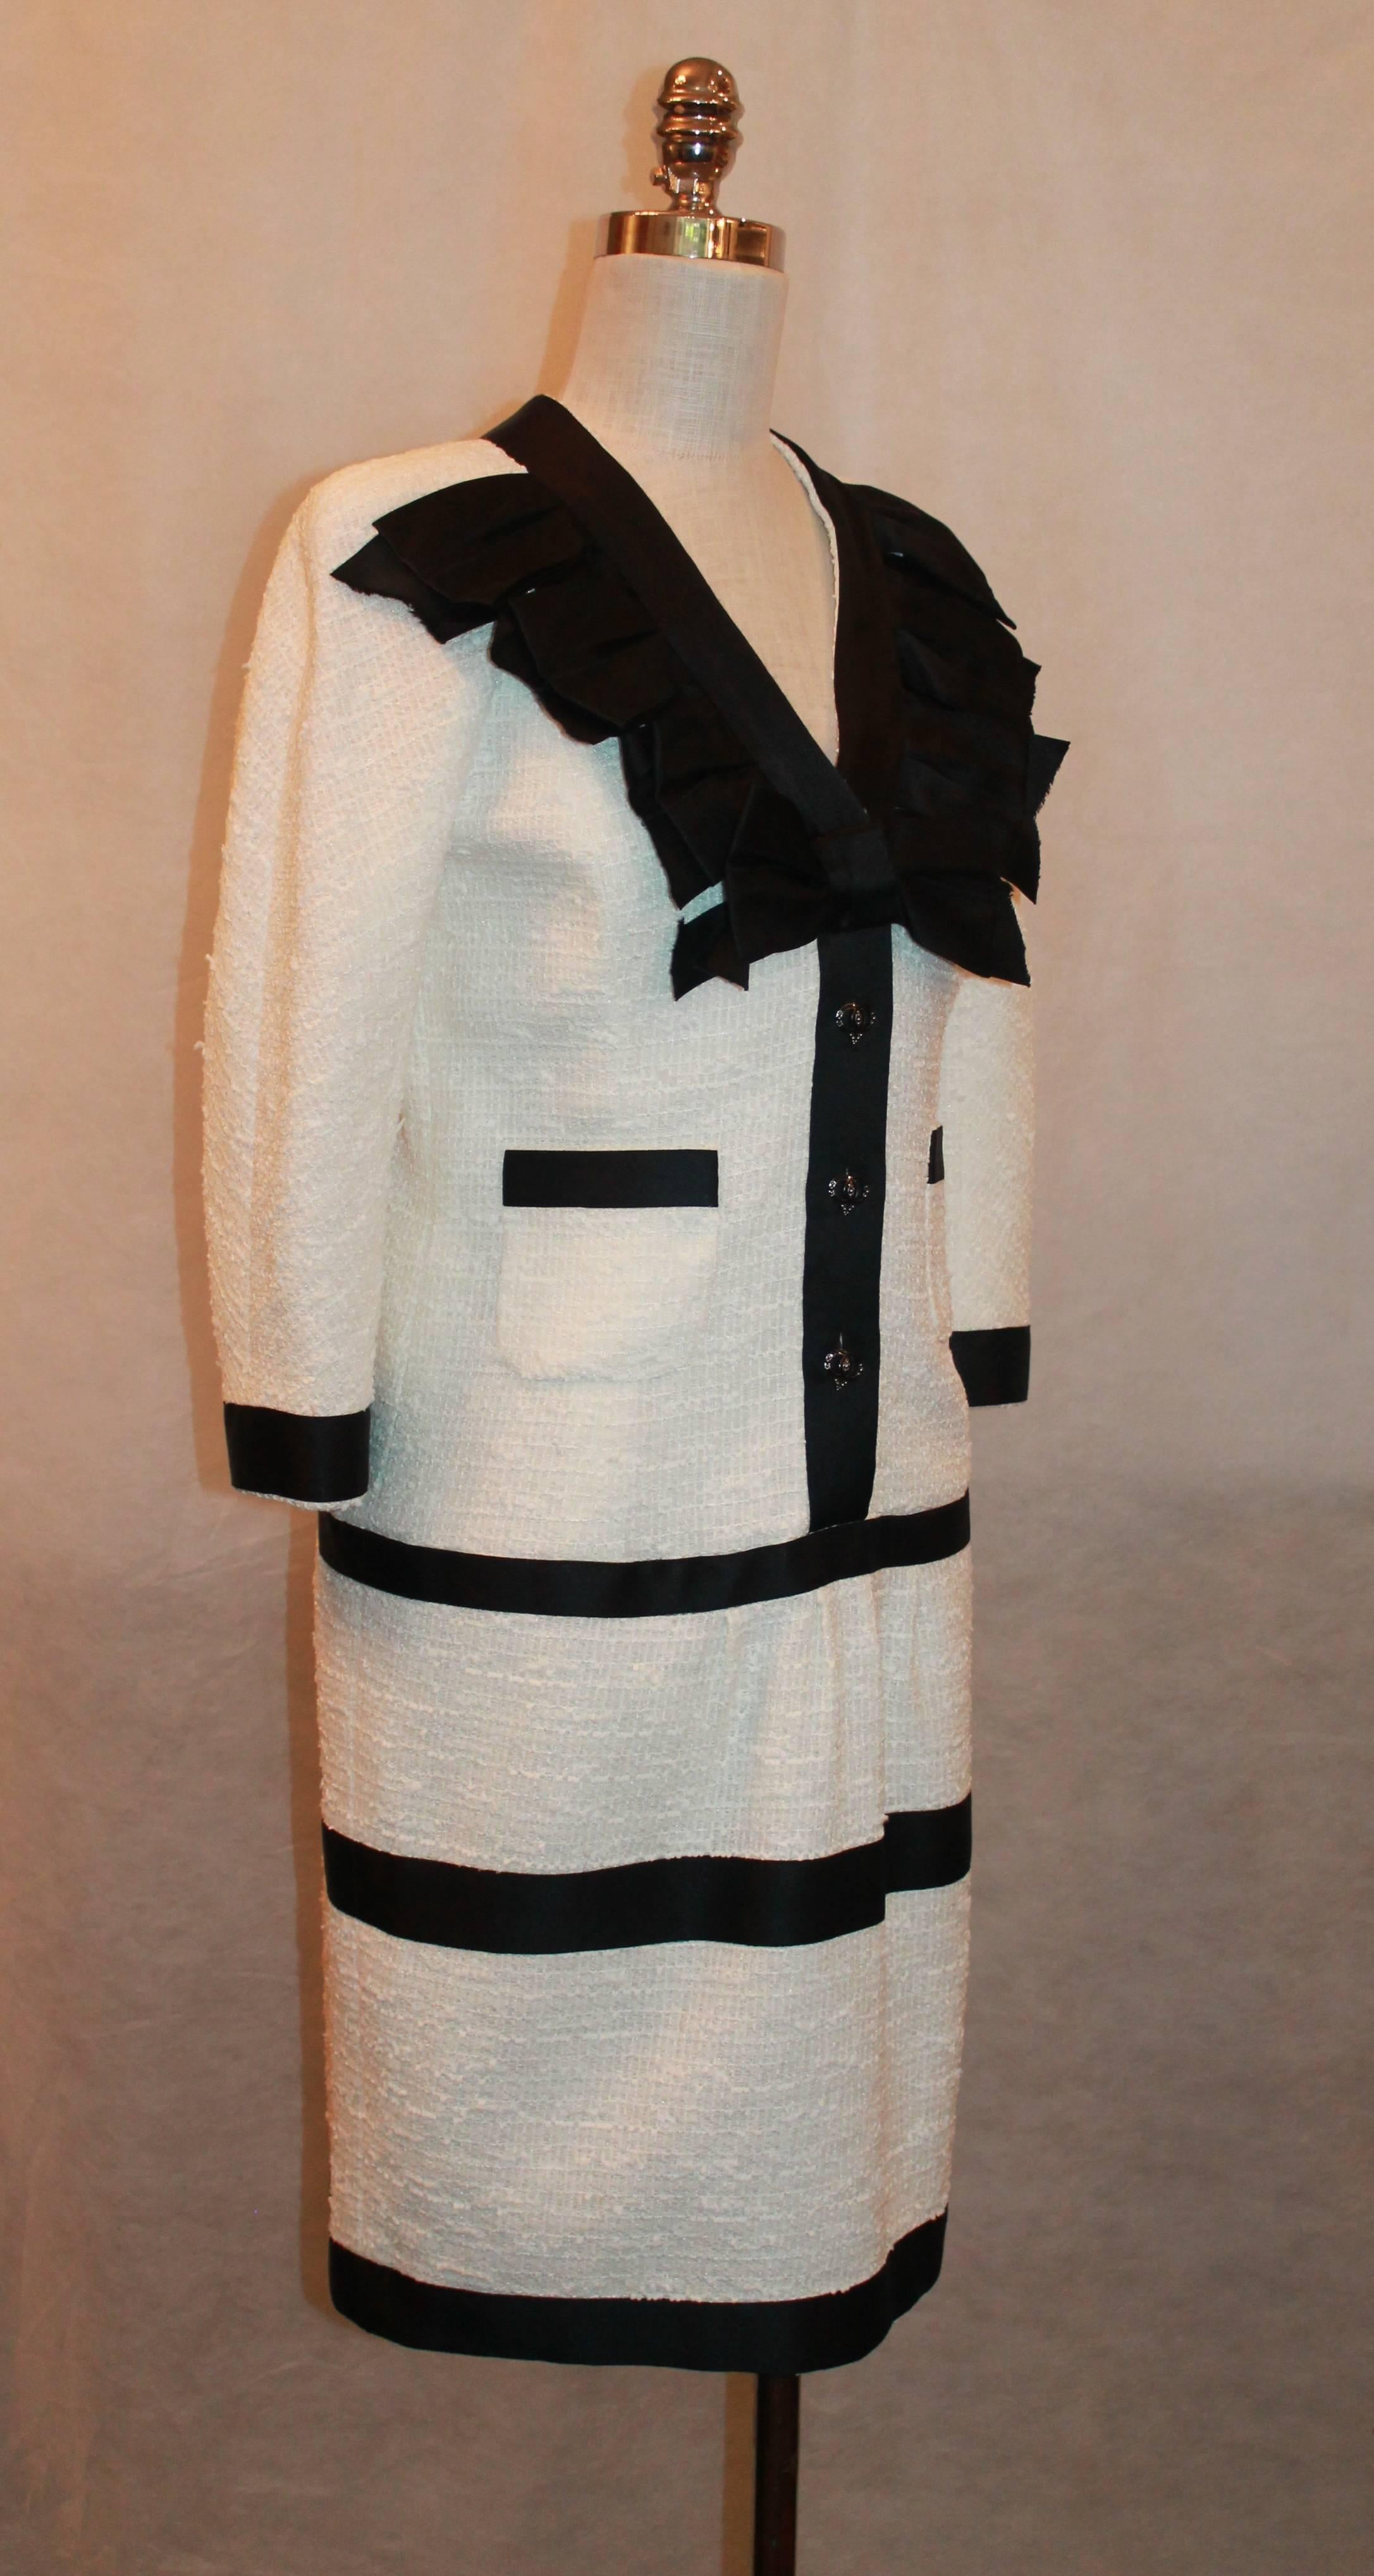 2009 Chanel Black and White Tweed  3/4 Sleeve Dress with Ribbon Trim - 40 This  dress is in excellent condition and is a Nylon-Cotton- Wool blend.  There is a black and white design on the collar. The button is made up of a CC black enamel and pearl